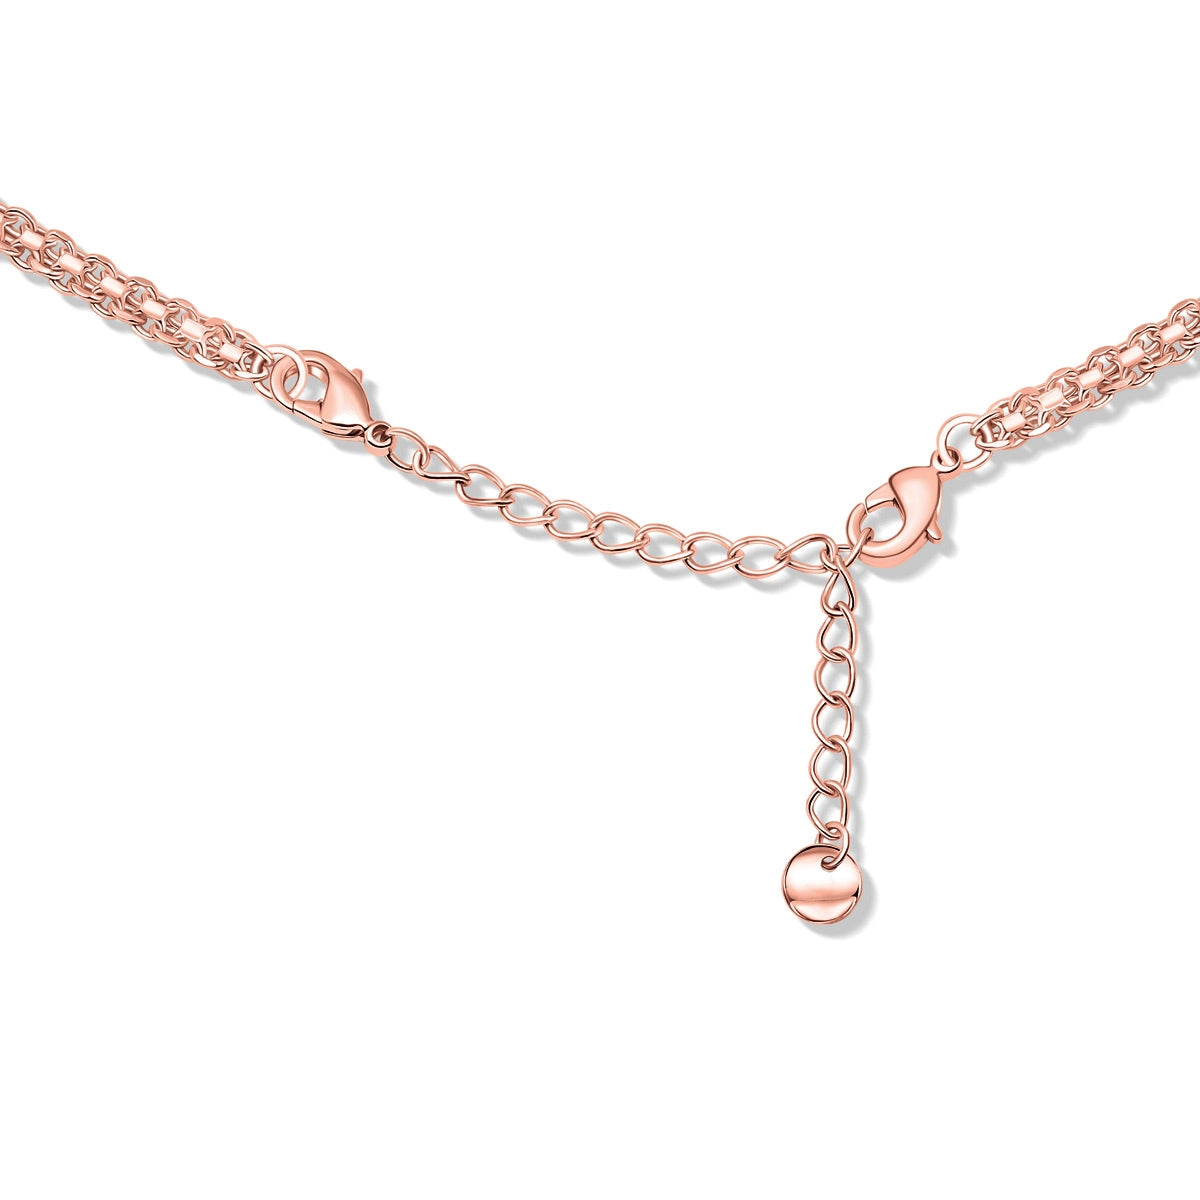 Rose gold lobster clasp